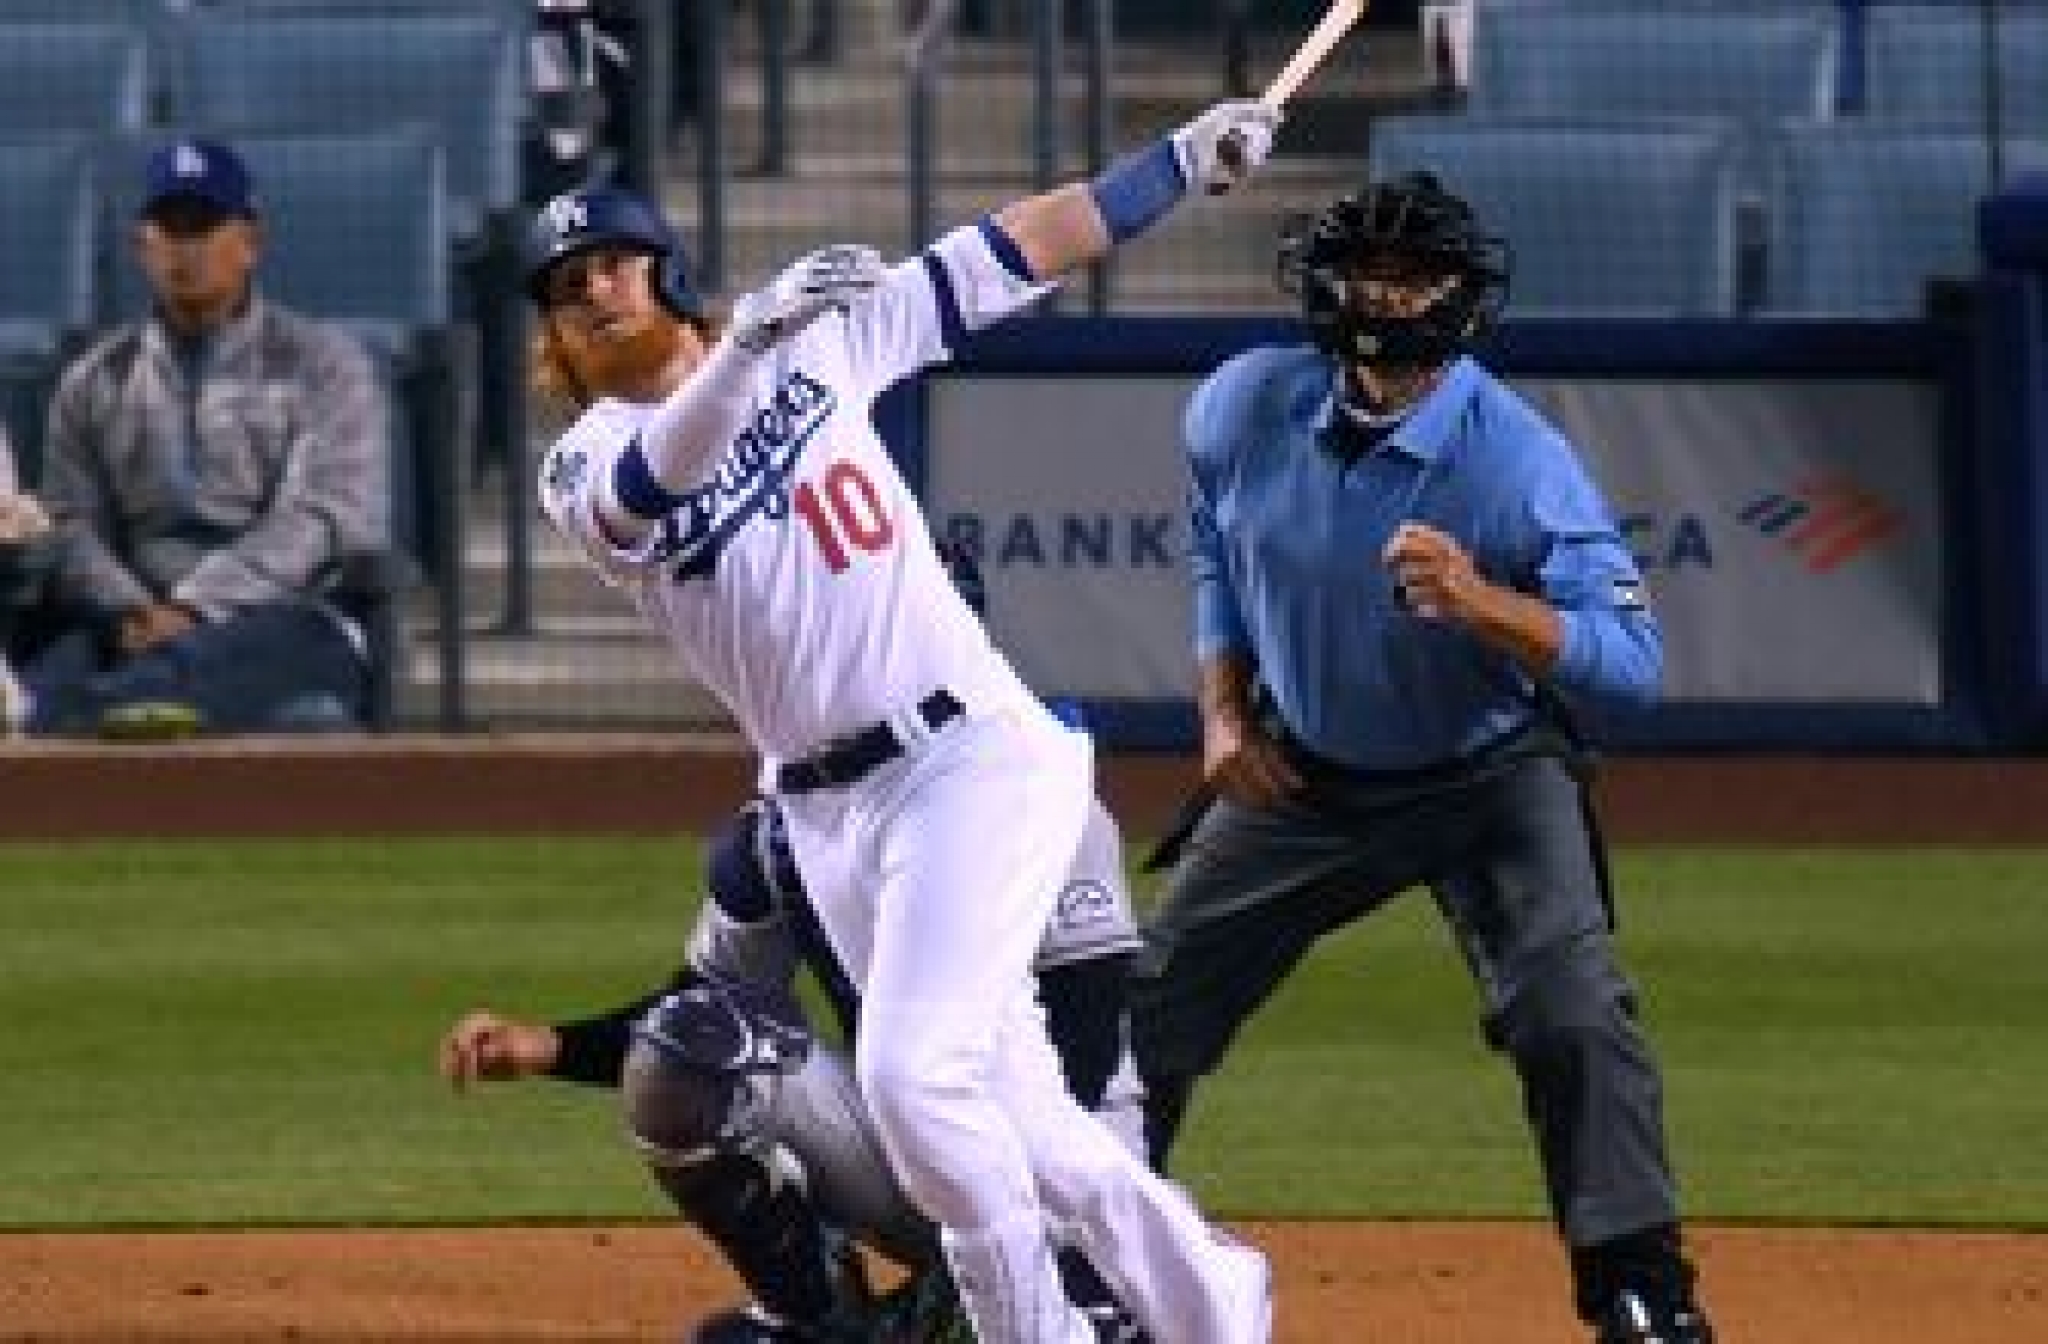 Dodgers get by the Rockies, helped by Turner, McKinstry home runs